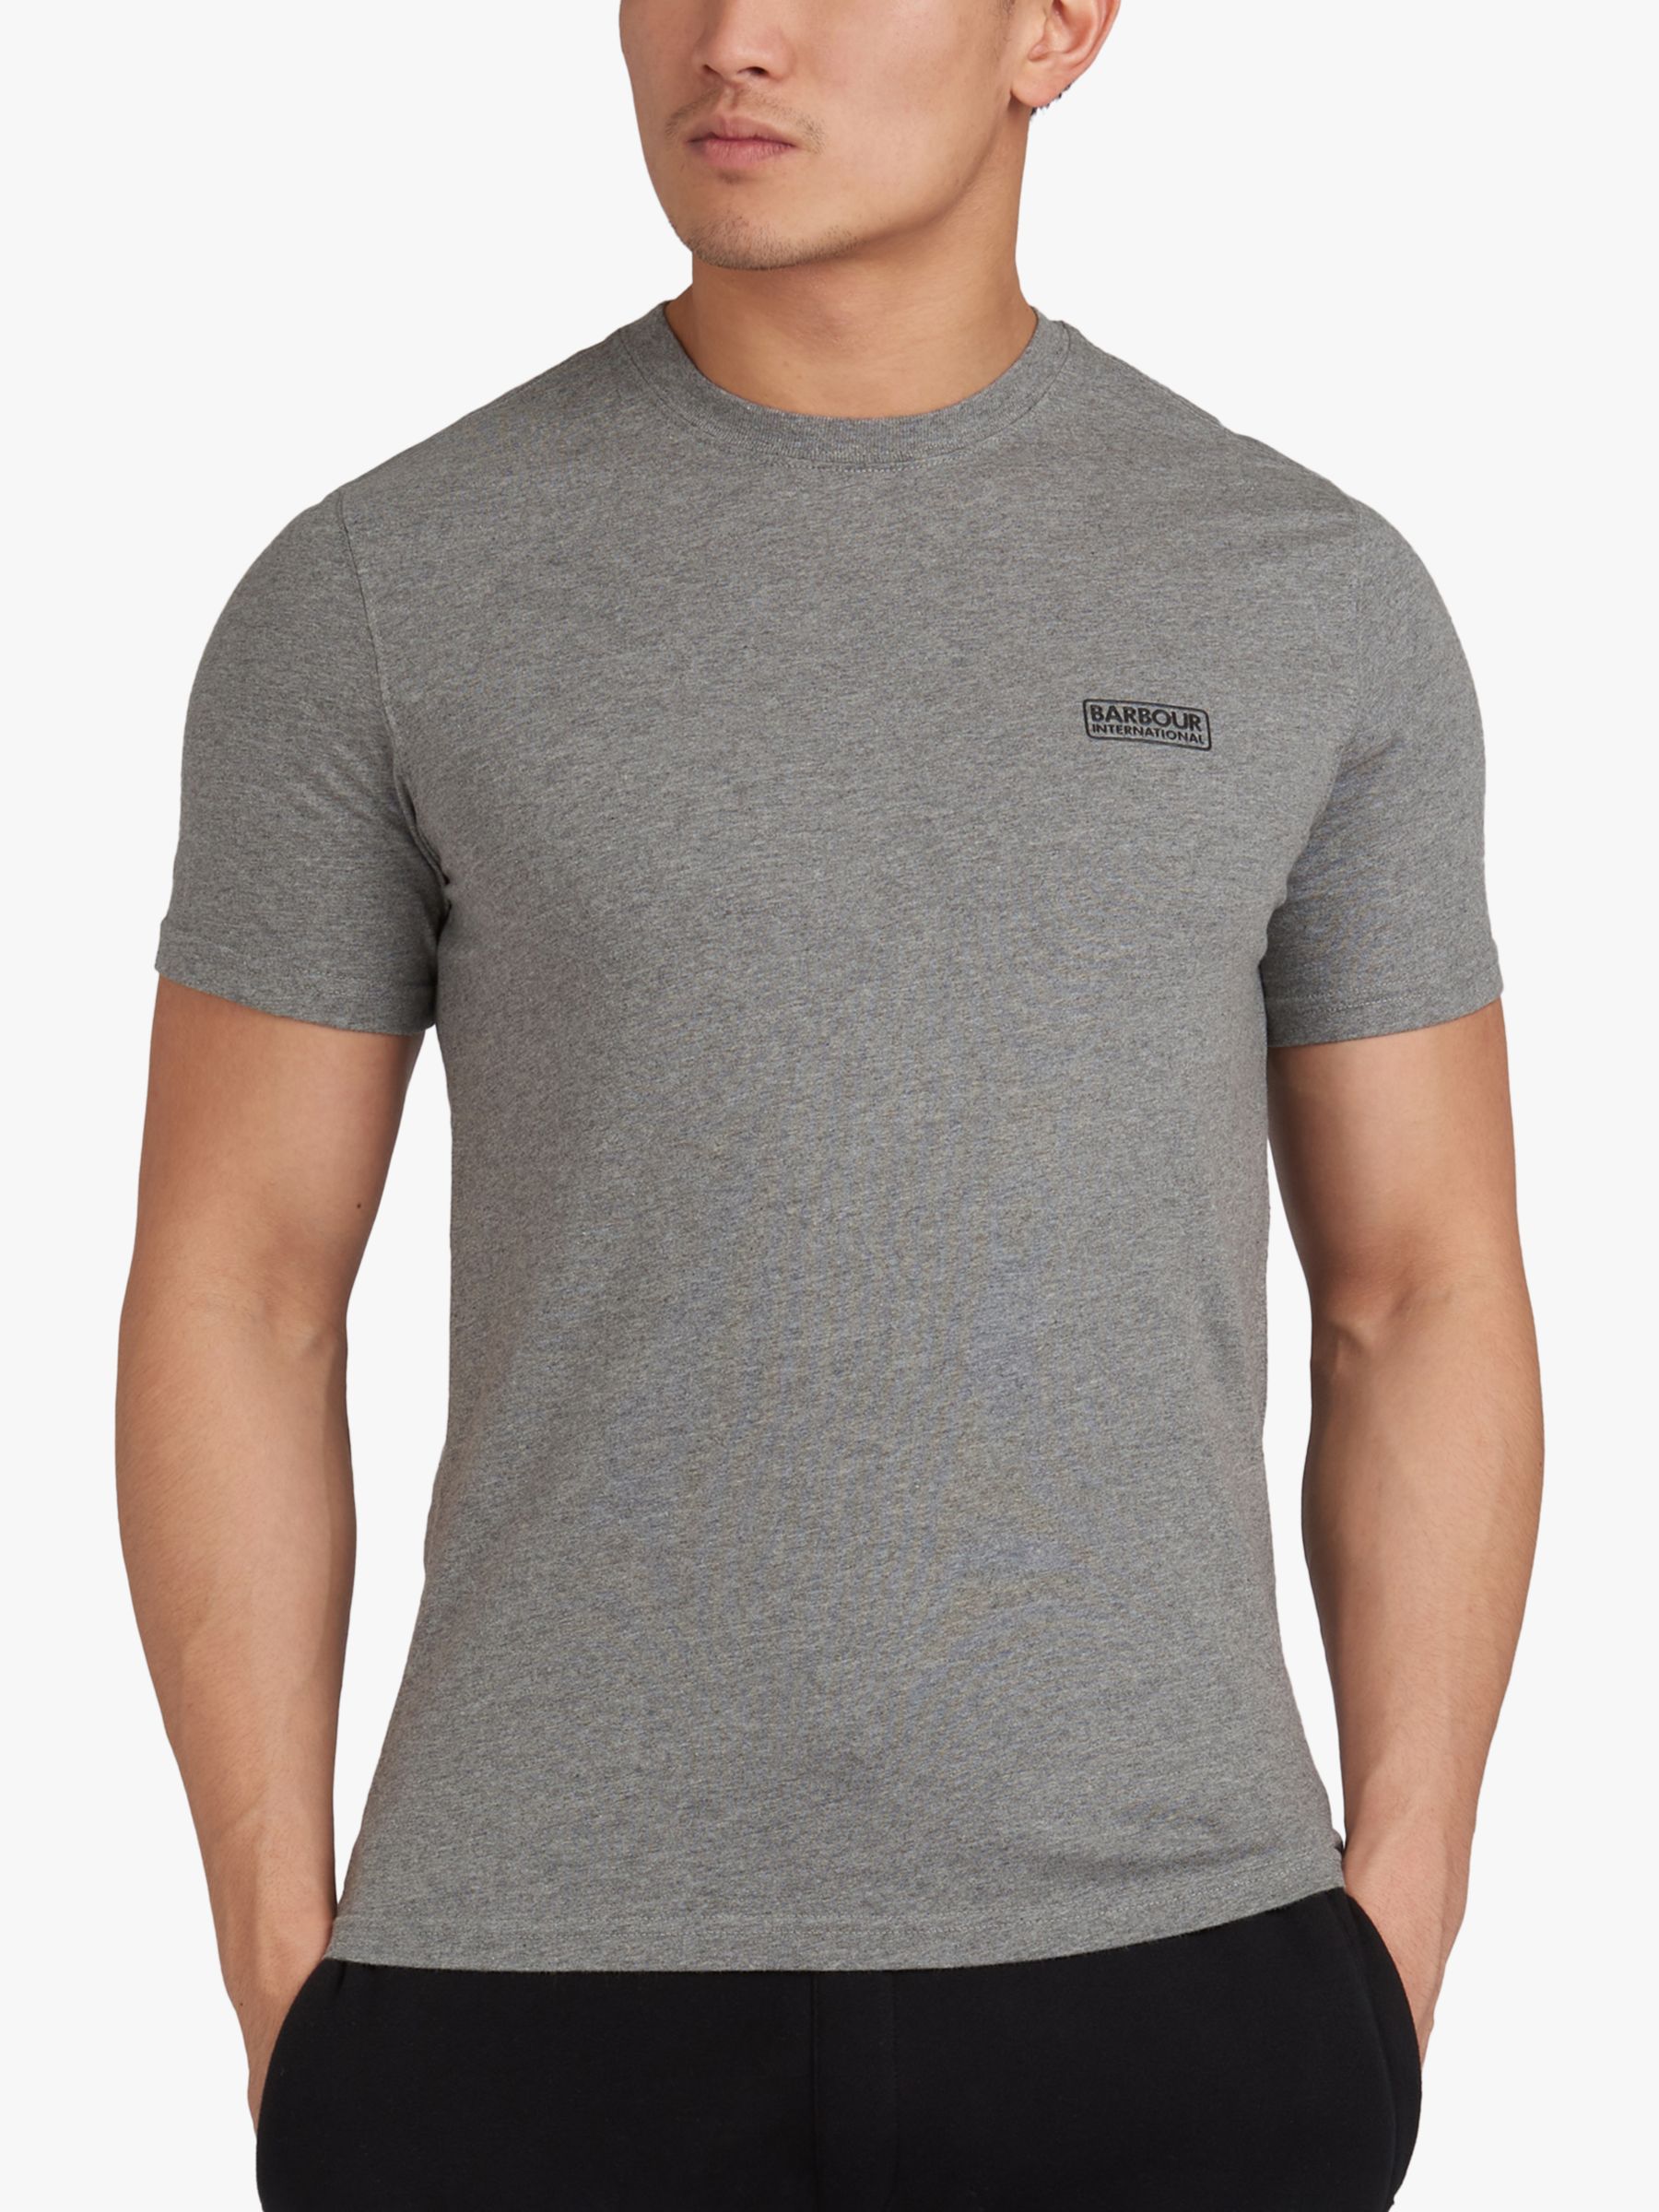 Barbour International Small Logo T-Shirt, Anthracite Marl, S